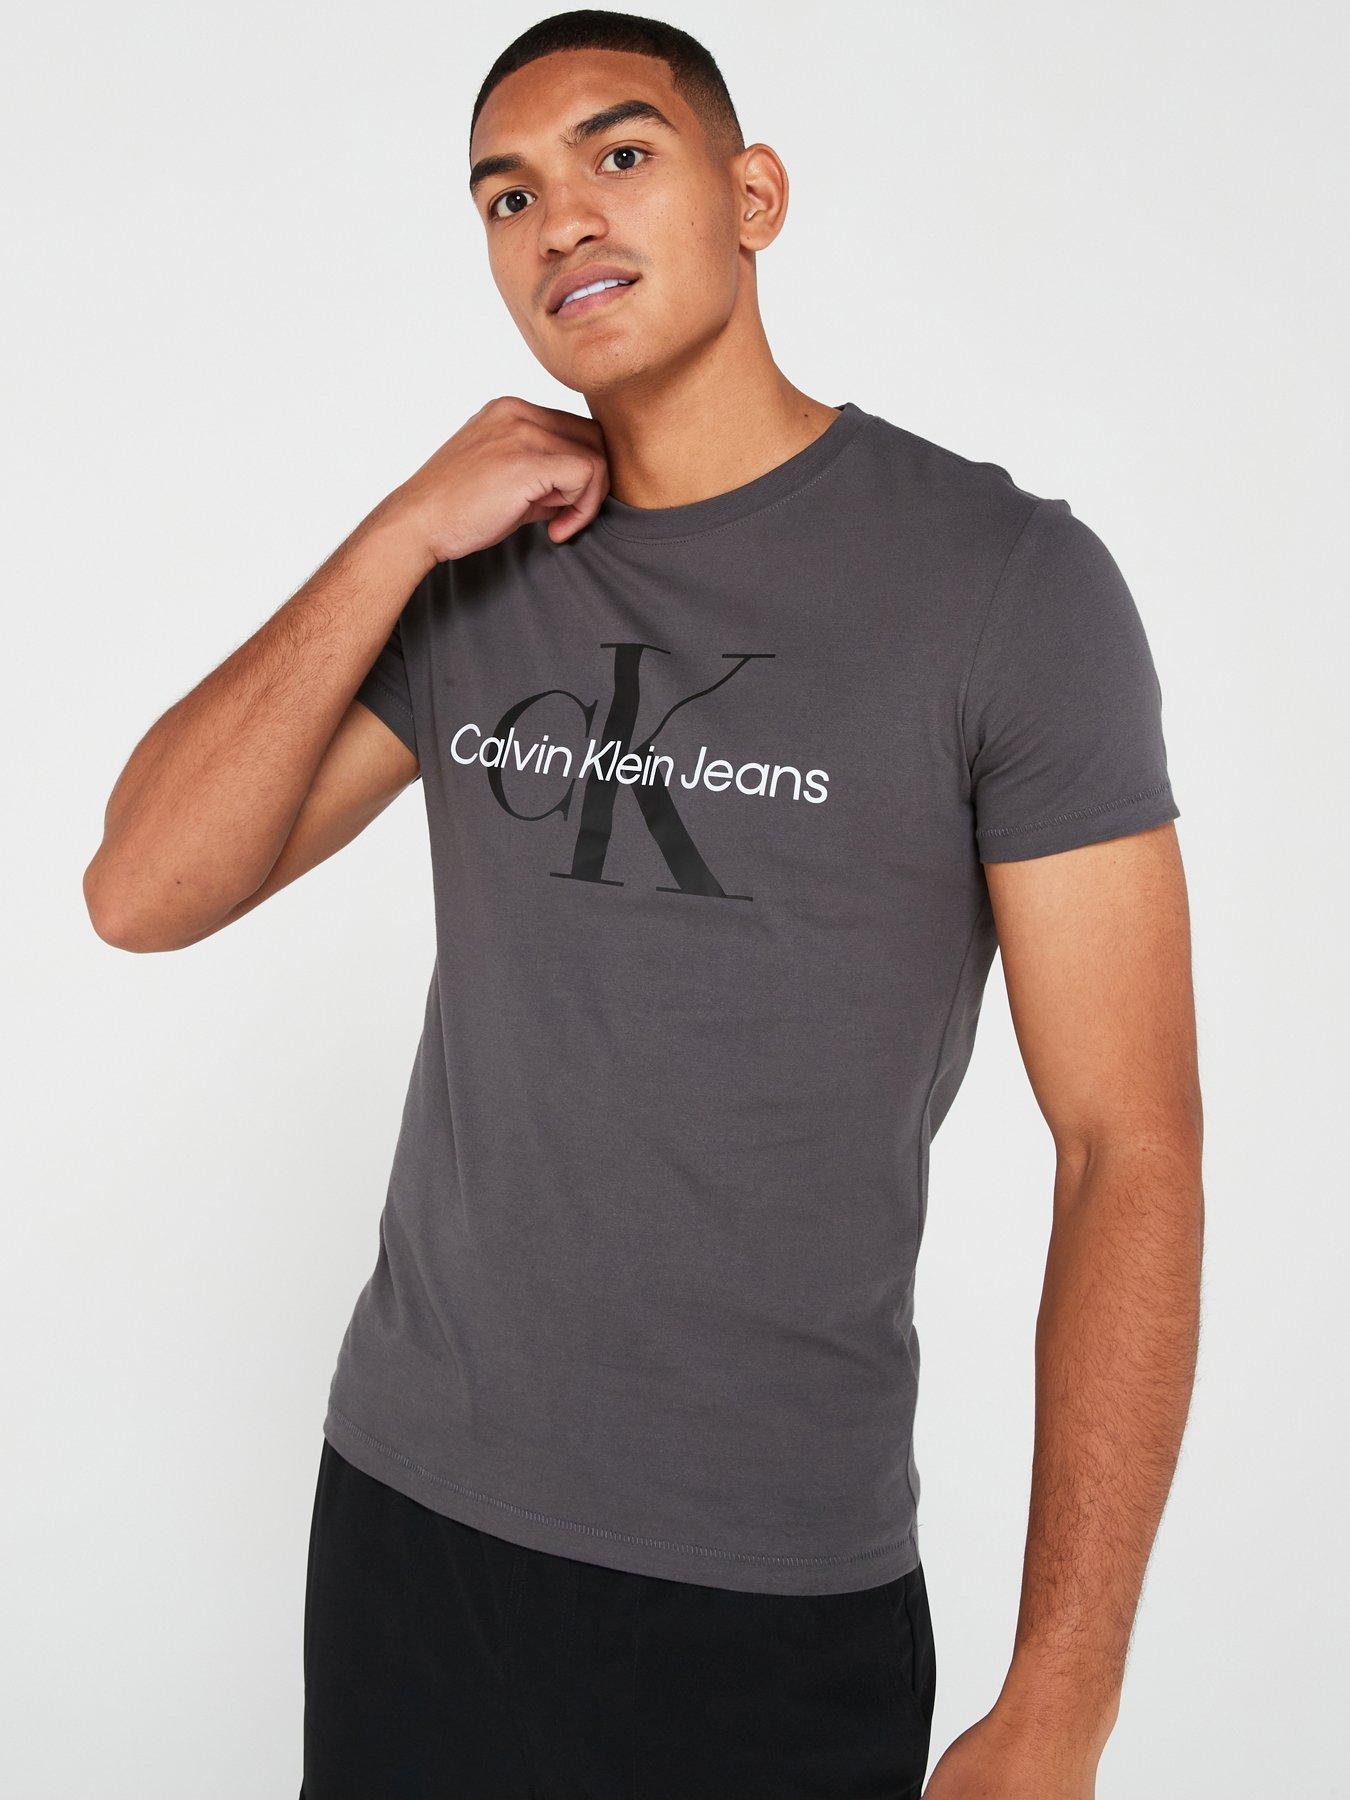 Latest Offers, Calvin klein, T-shirts & polos, Men